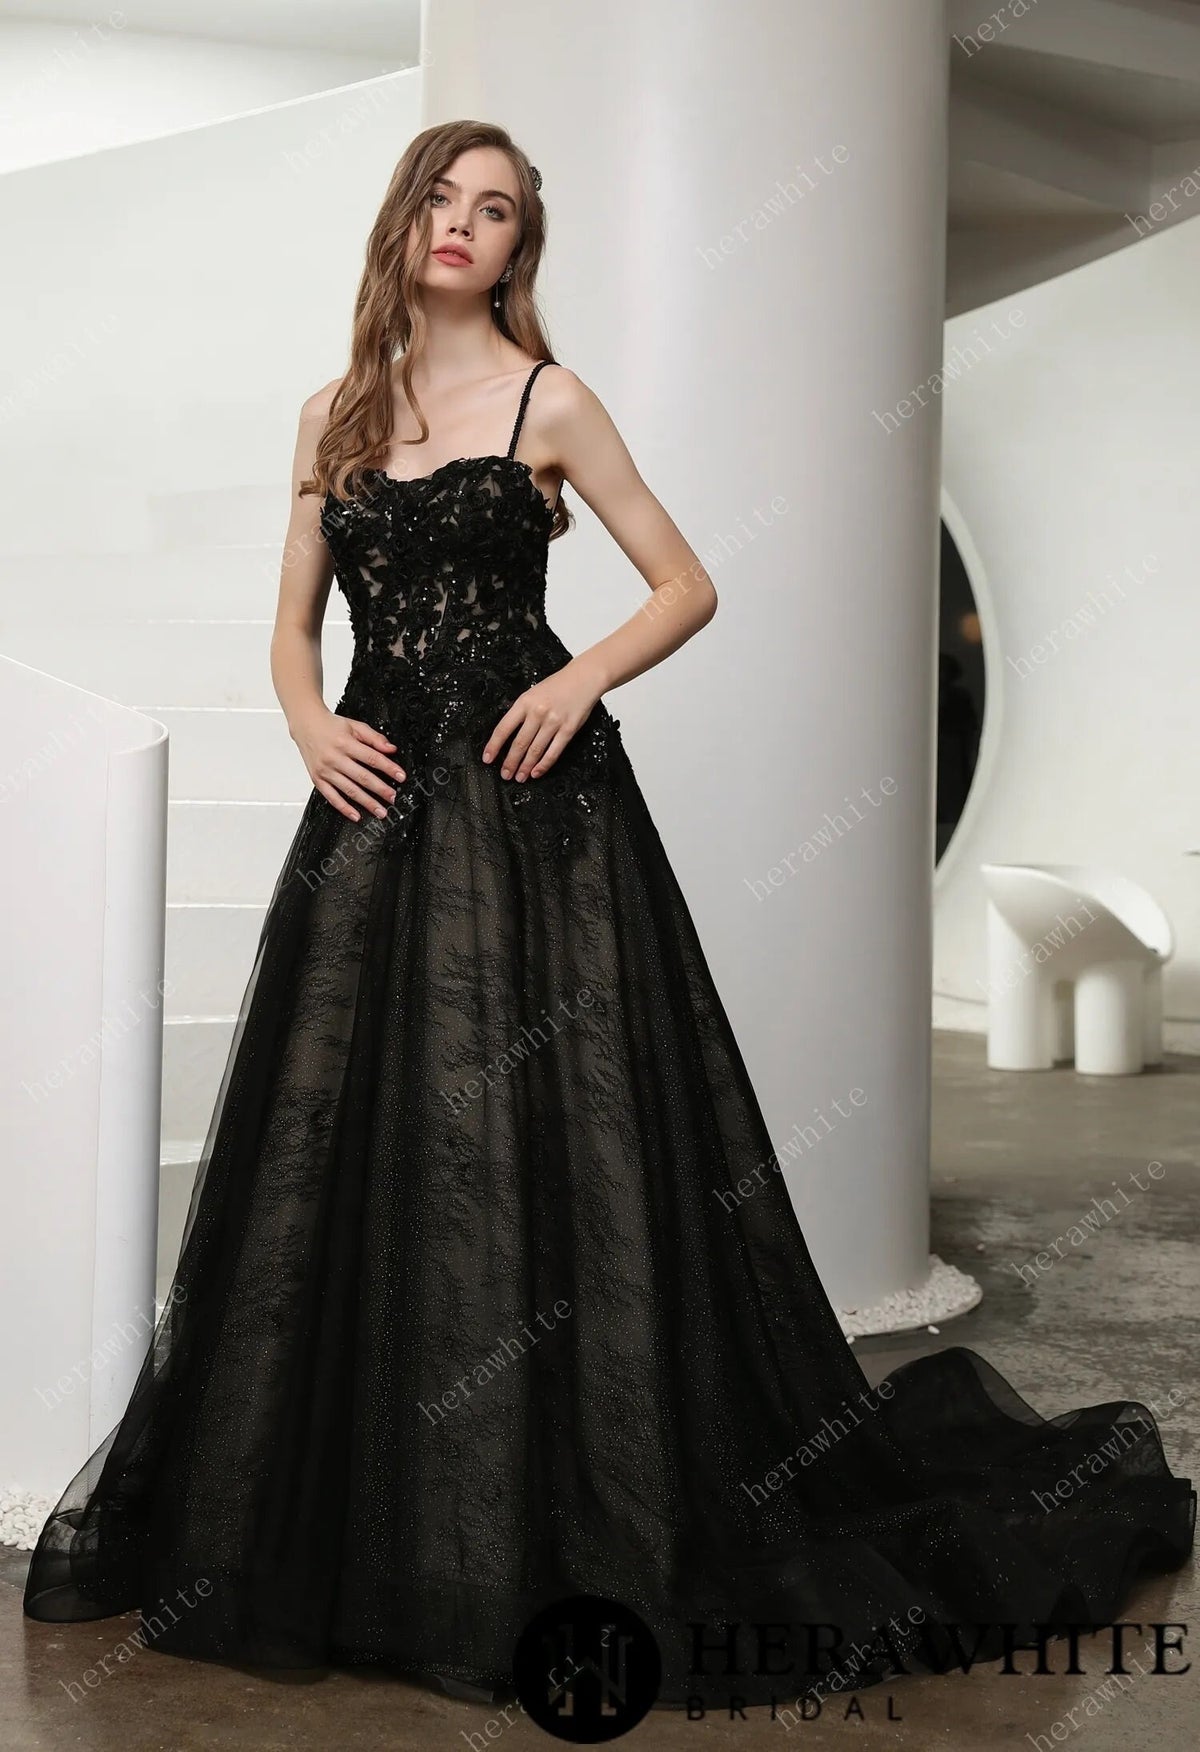 Gothic Black Illusion Lace Wedding Dress with Detachable Long Sleeves Aline Sparkle Dress Black and Nude Straps Sweetheart Neckline